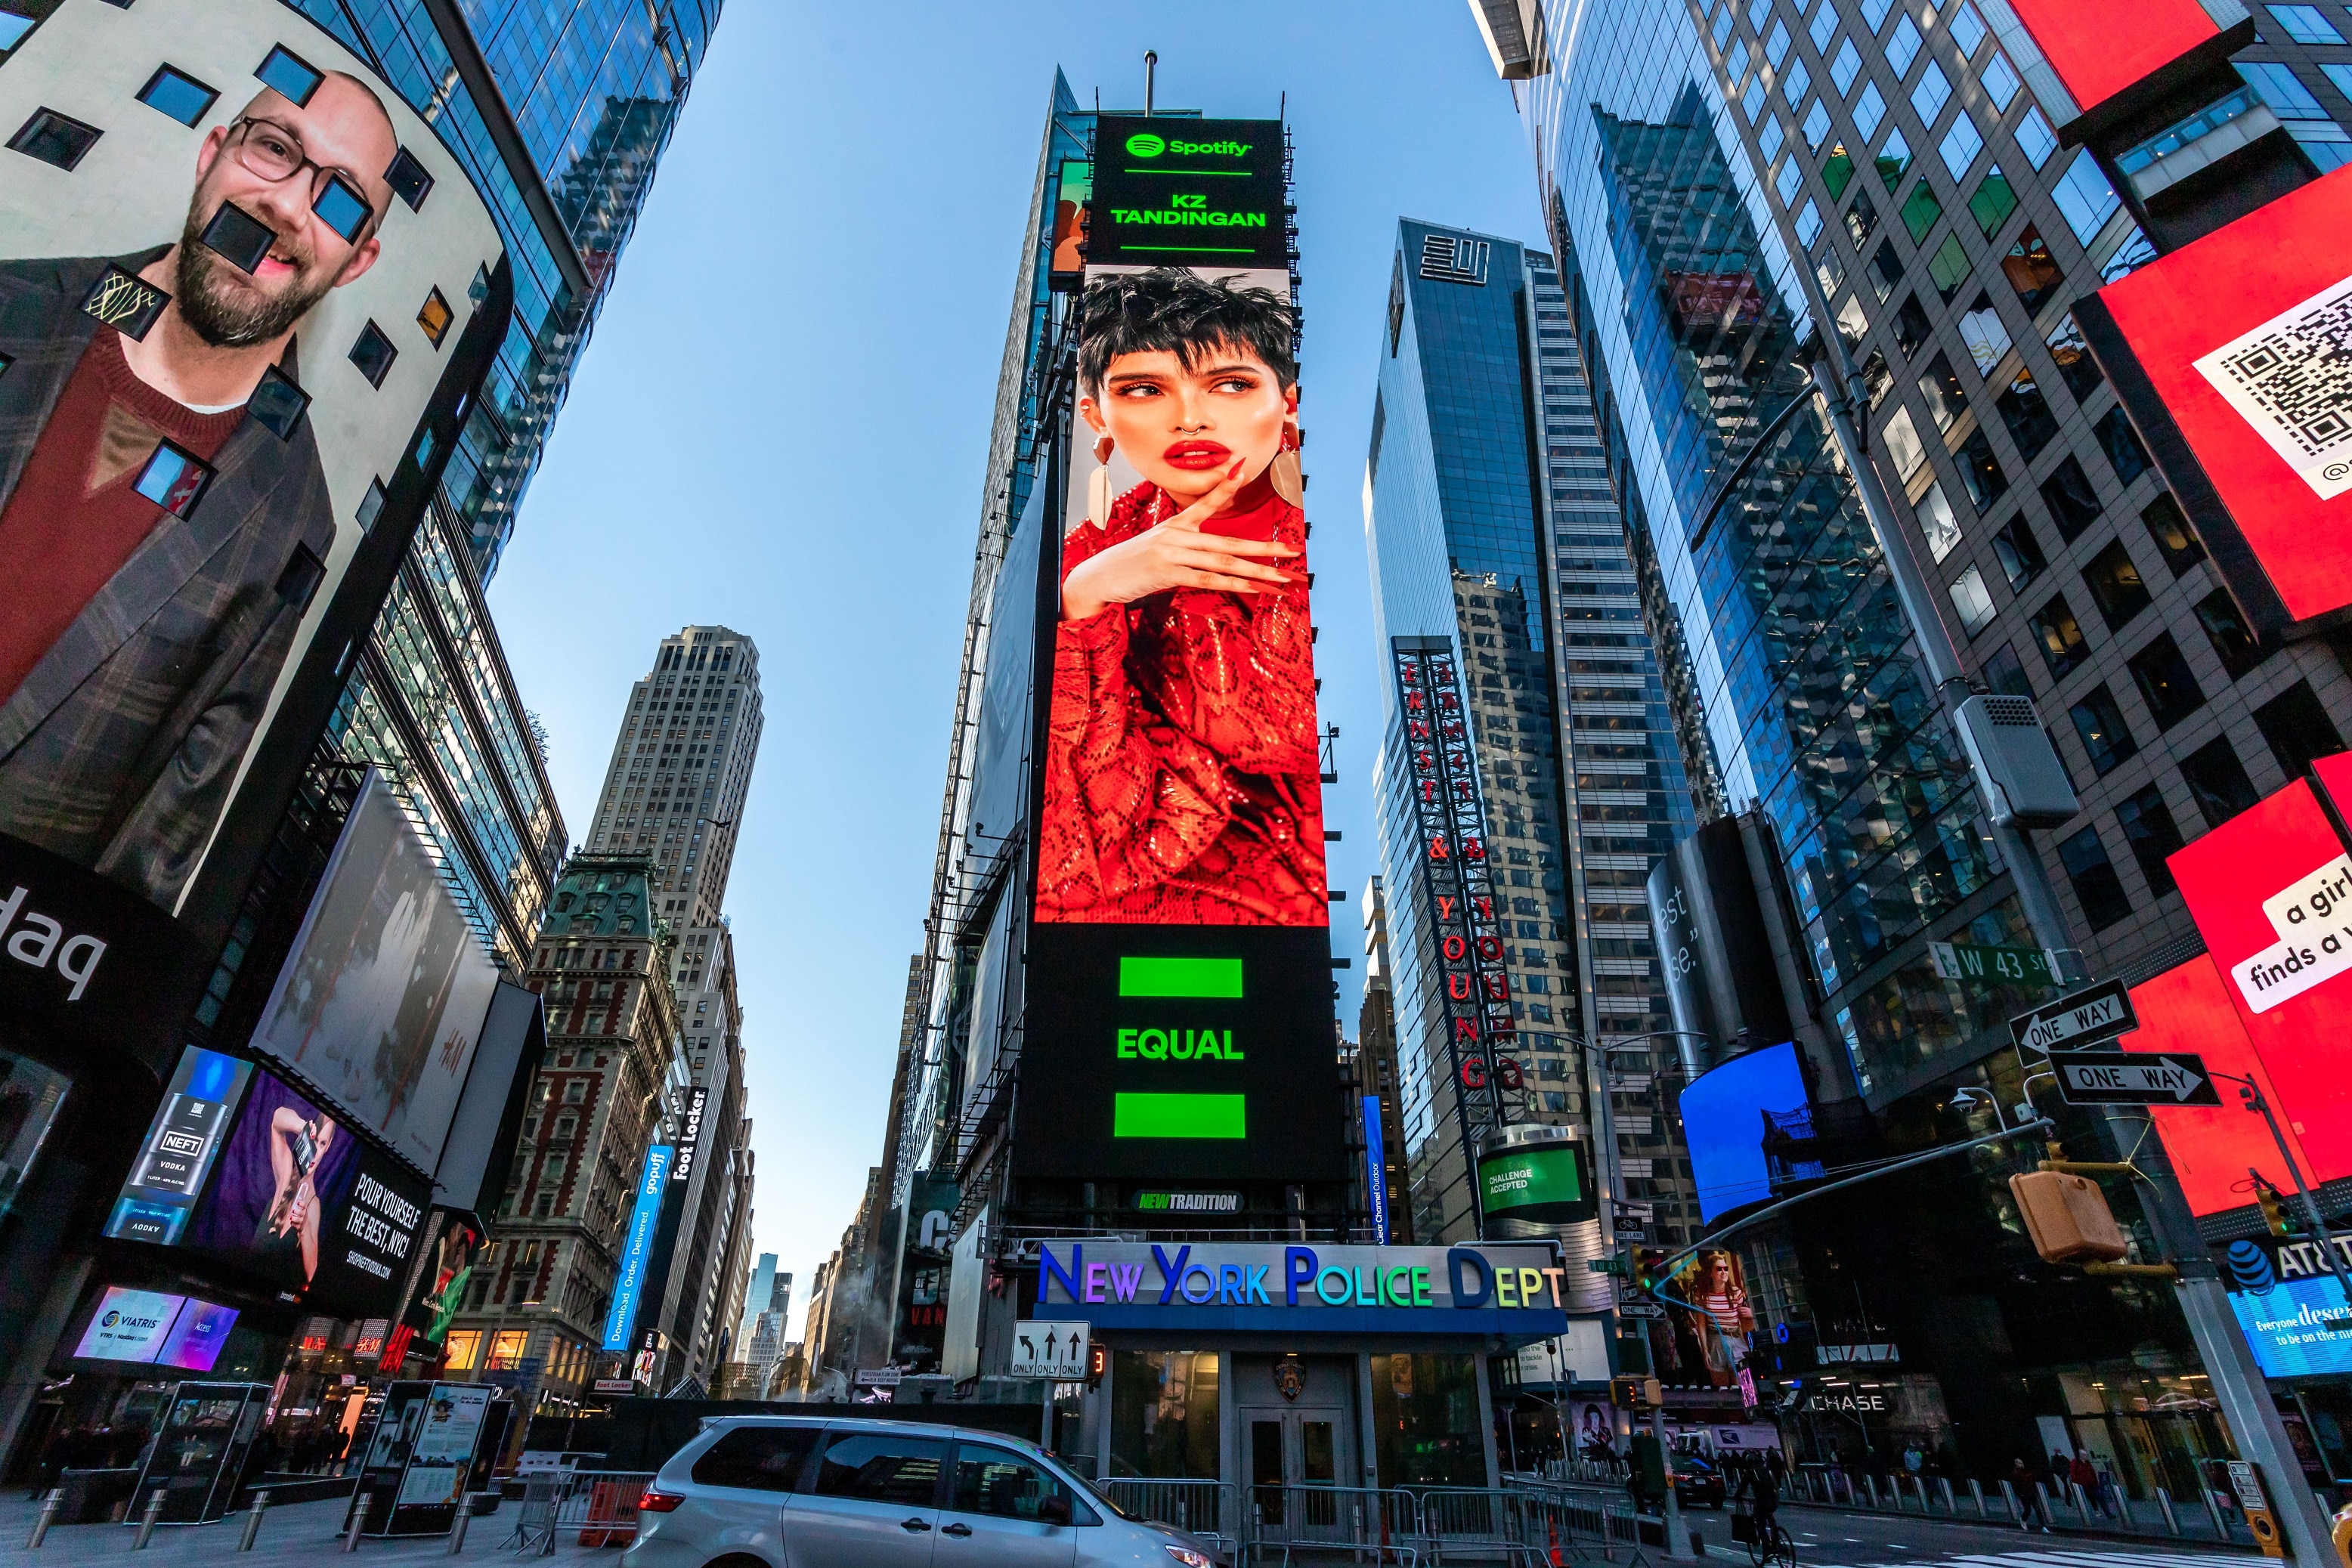 KZ Tandingan crosses borders with New York Times Square billboard feature